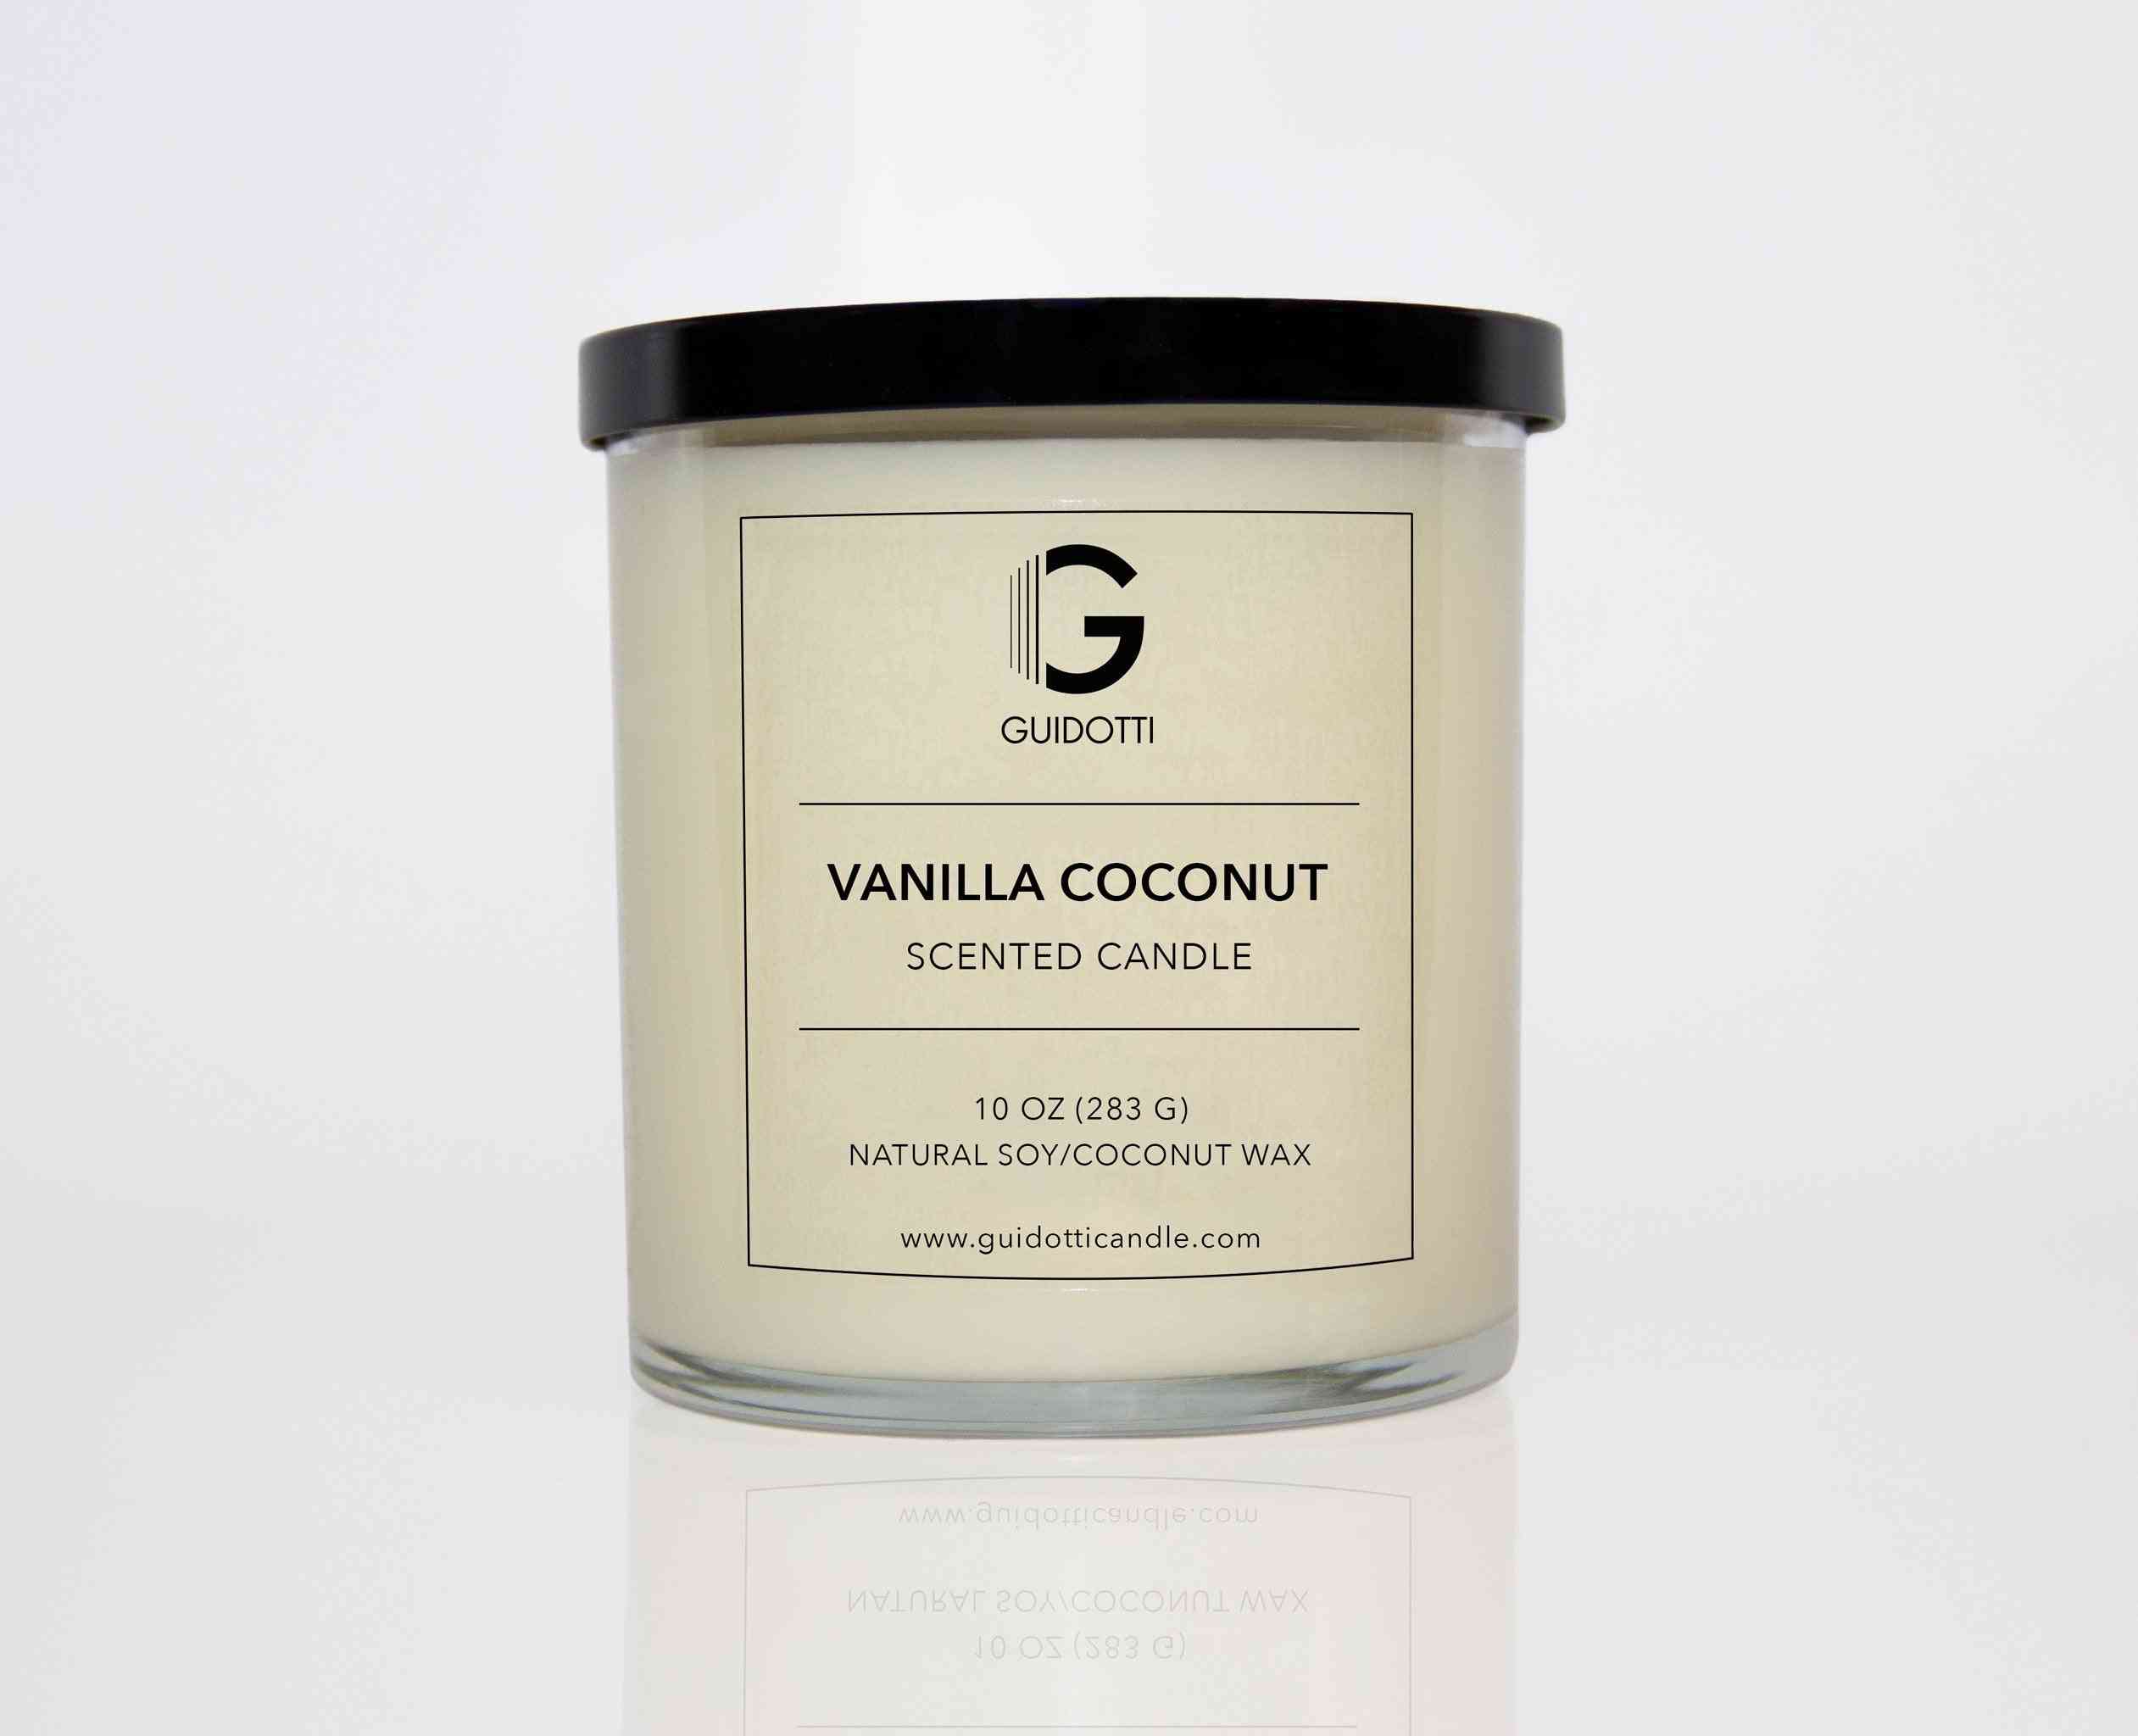 Vanilla Coconut Scented Soy Candle